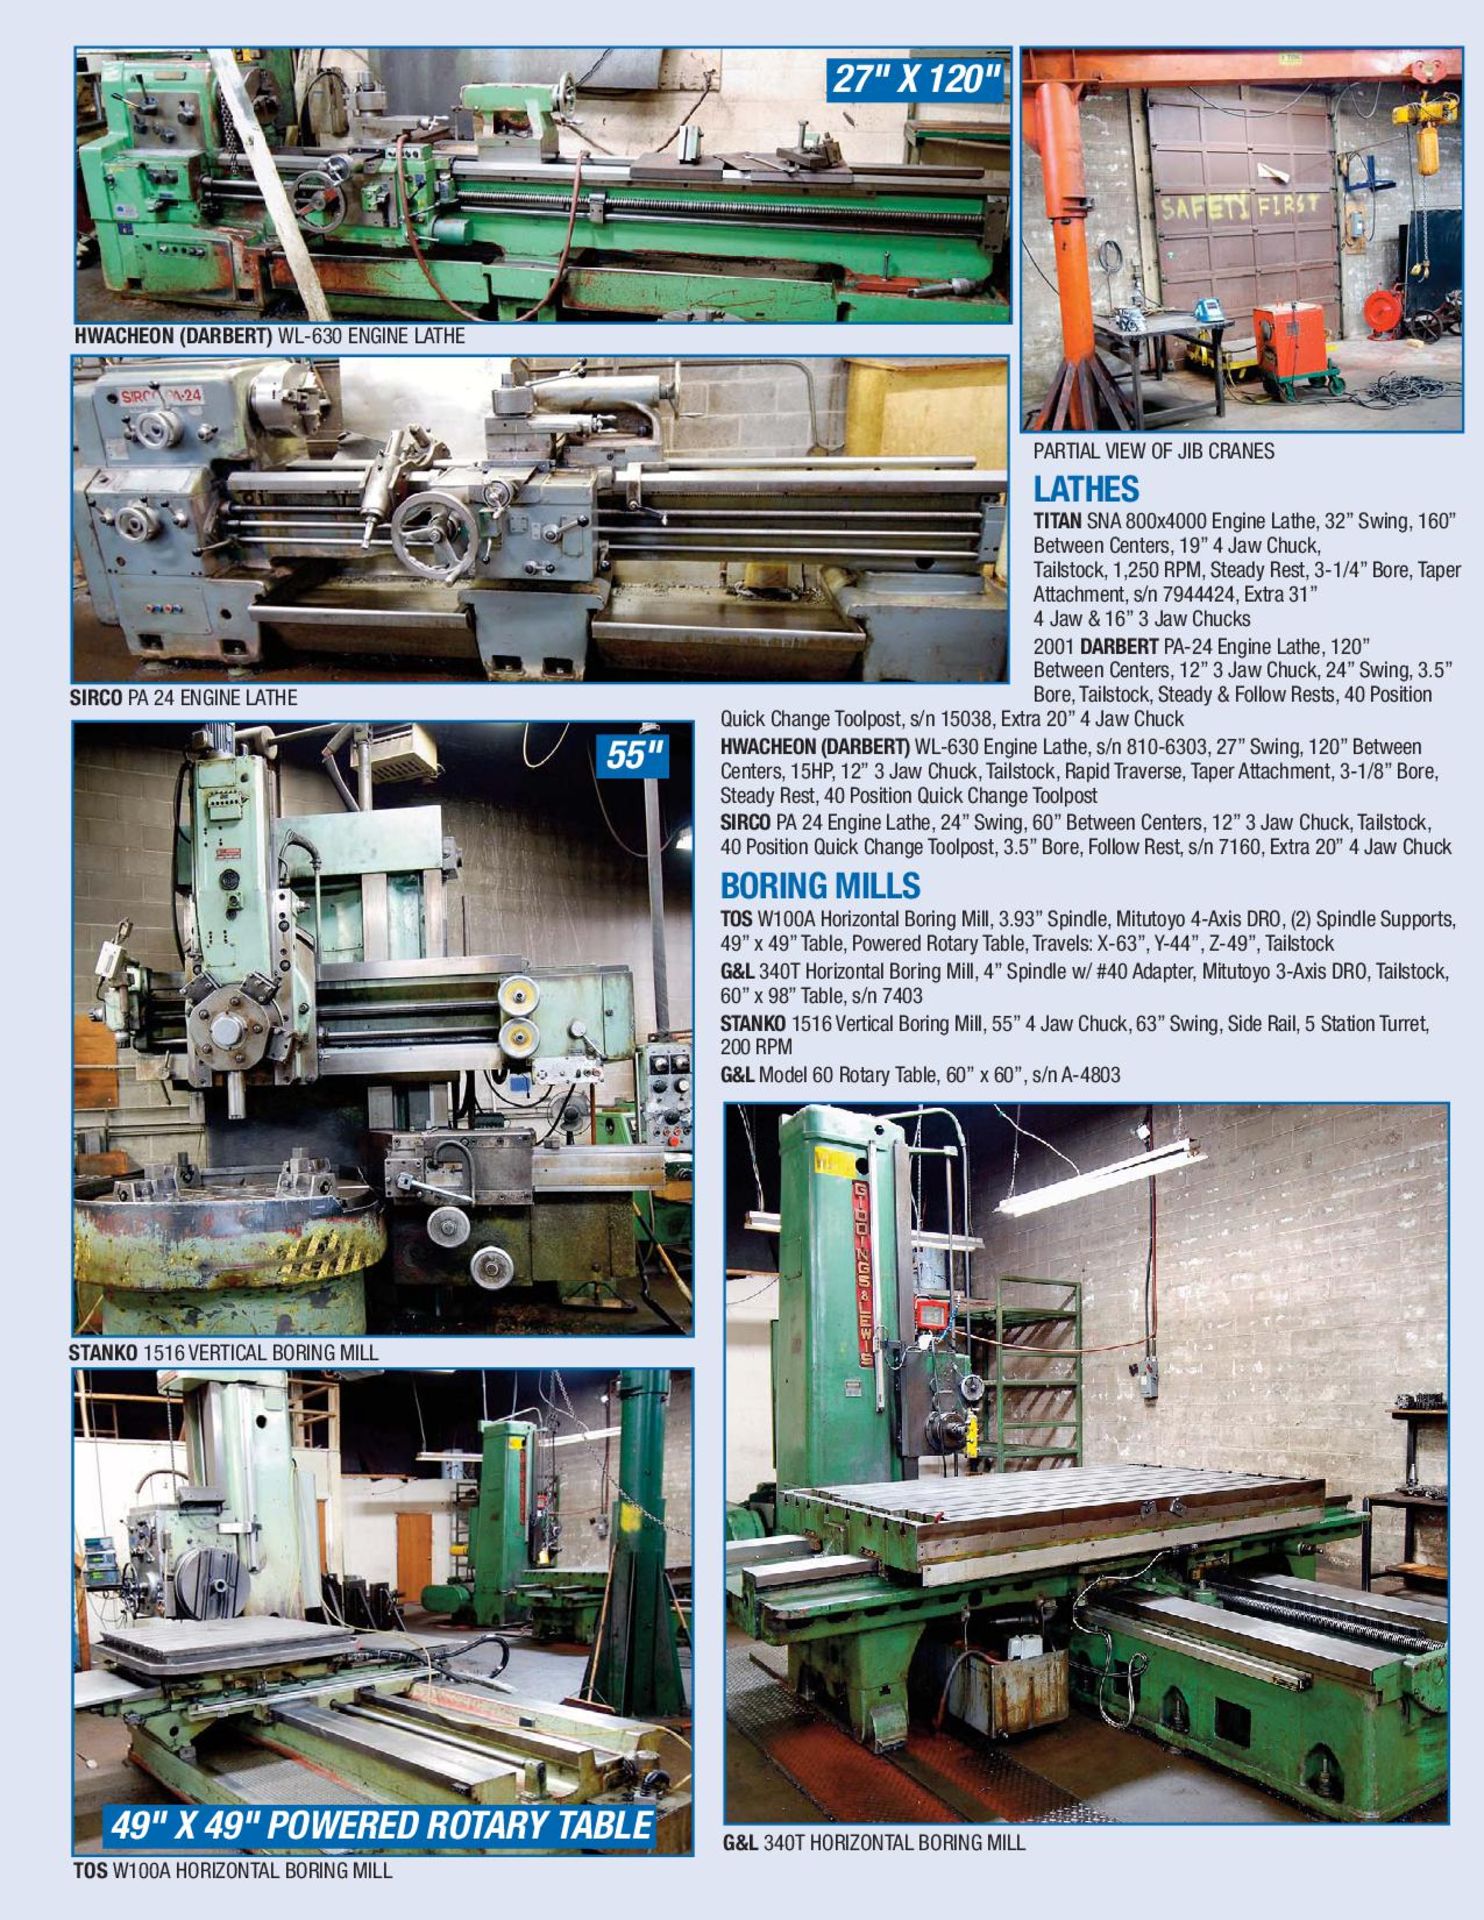 Full Catalog Coming Soon! Canian Precision Machine Shop - Image 2 of 4